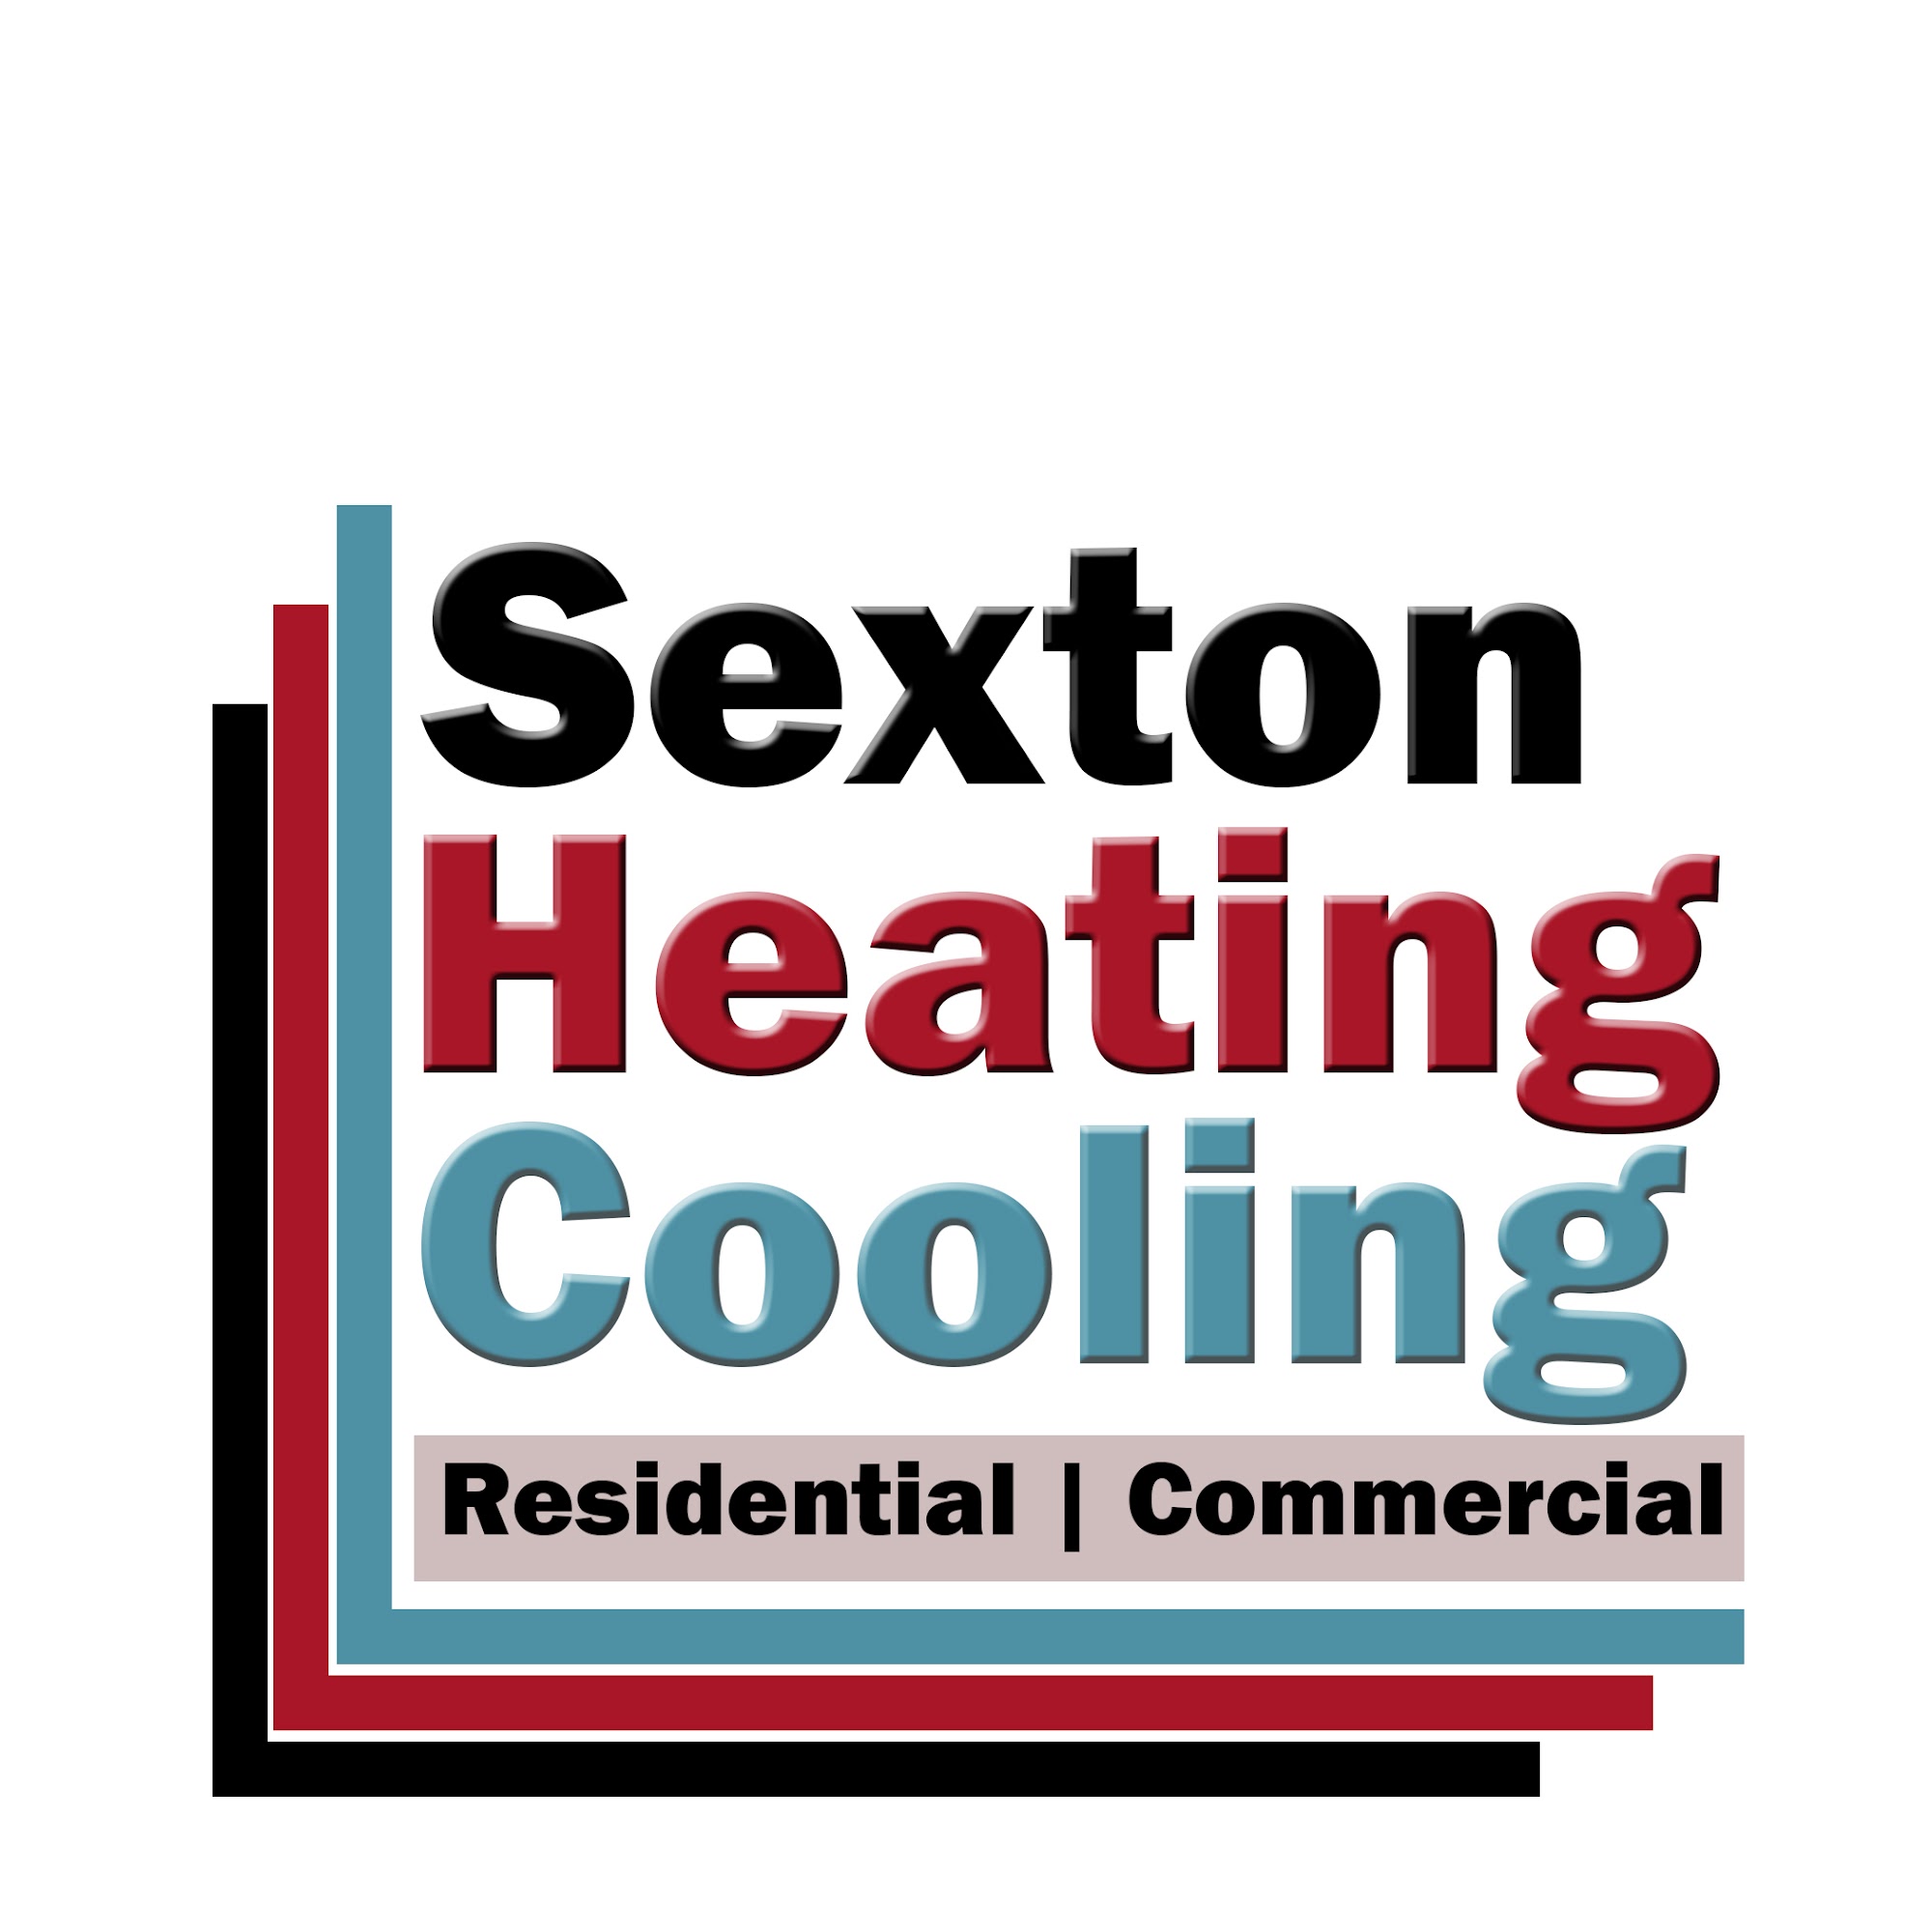 Sexton Heating & Cooling 318 W 9th St, Gibson City Illinois 60936